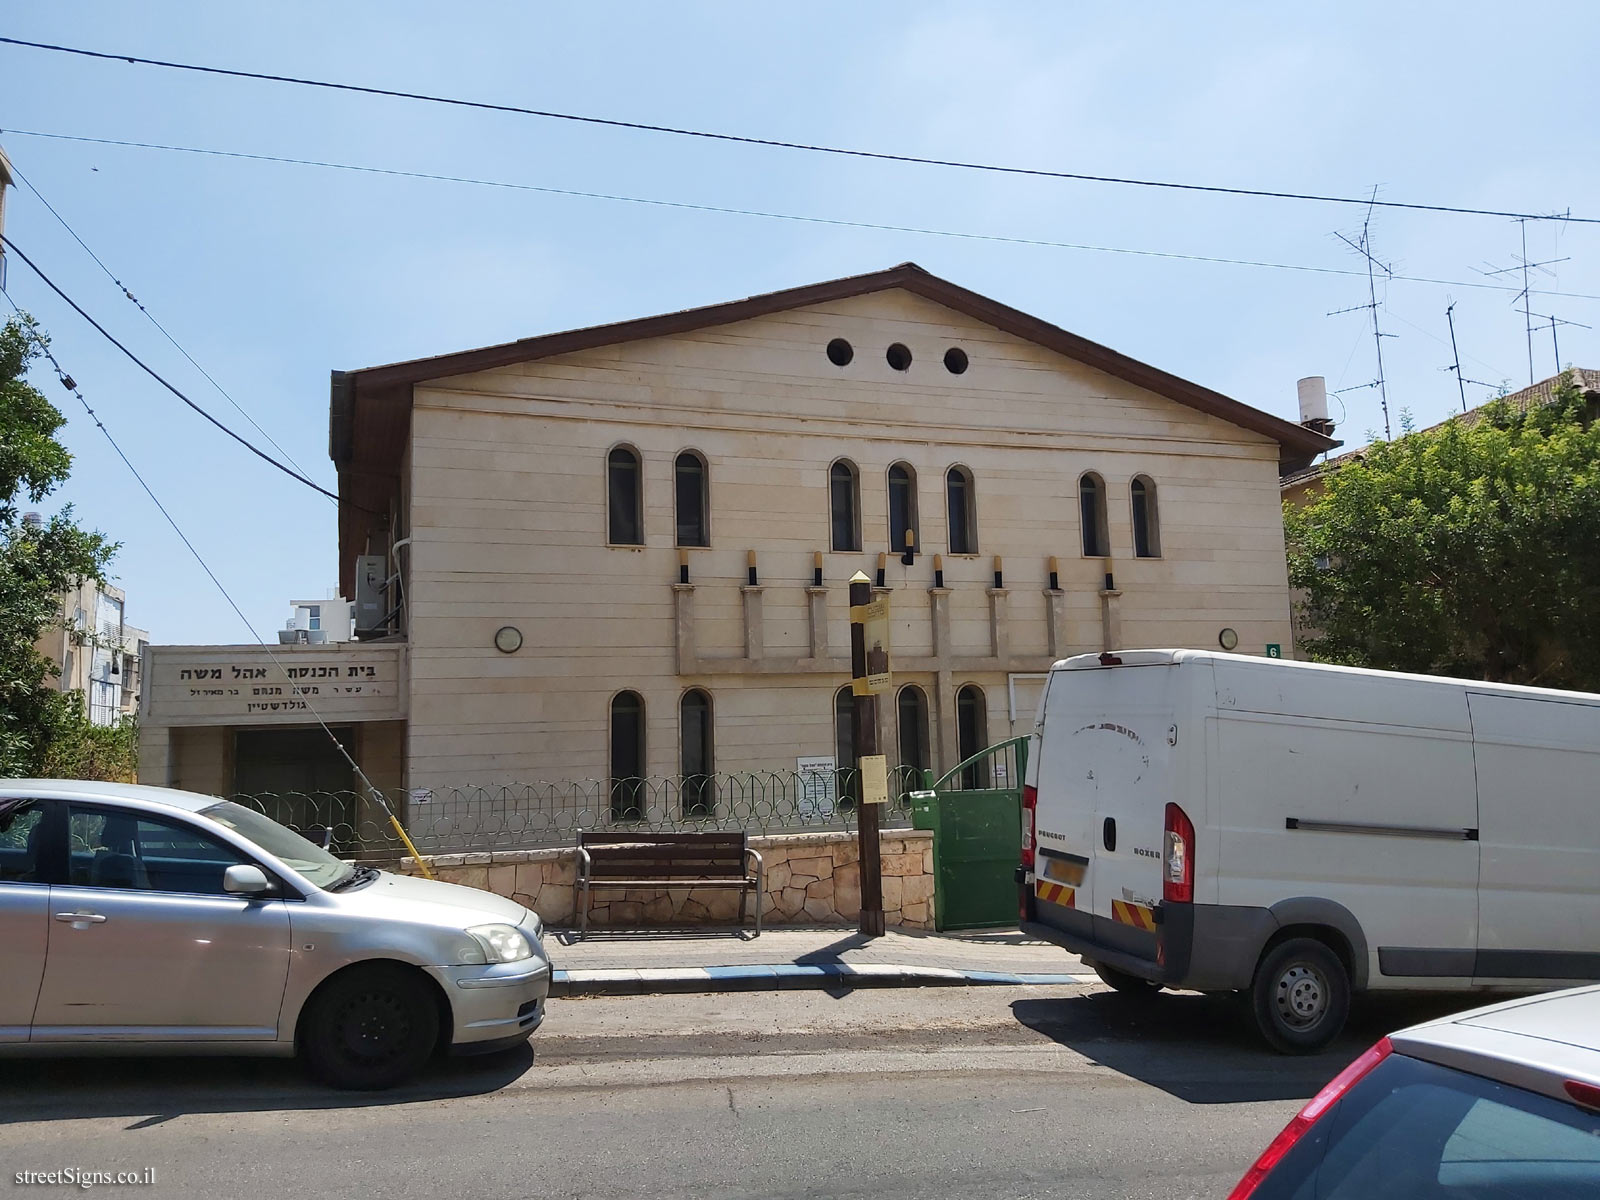 Rishonim route - Laying the cornerstone for the synagogue - Gordon St 8, Giv’atayim, Israel